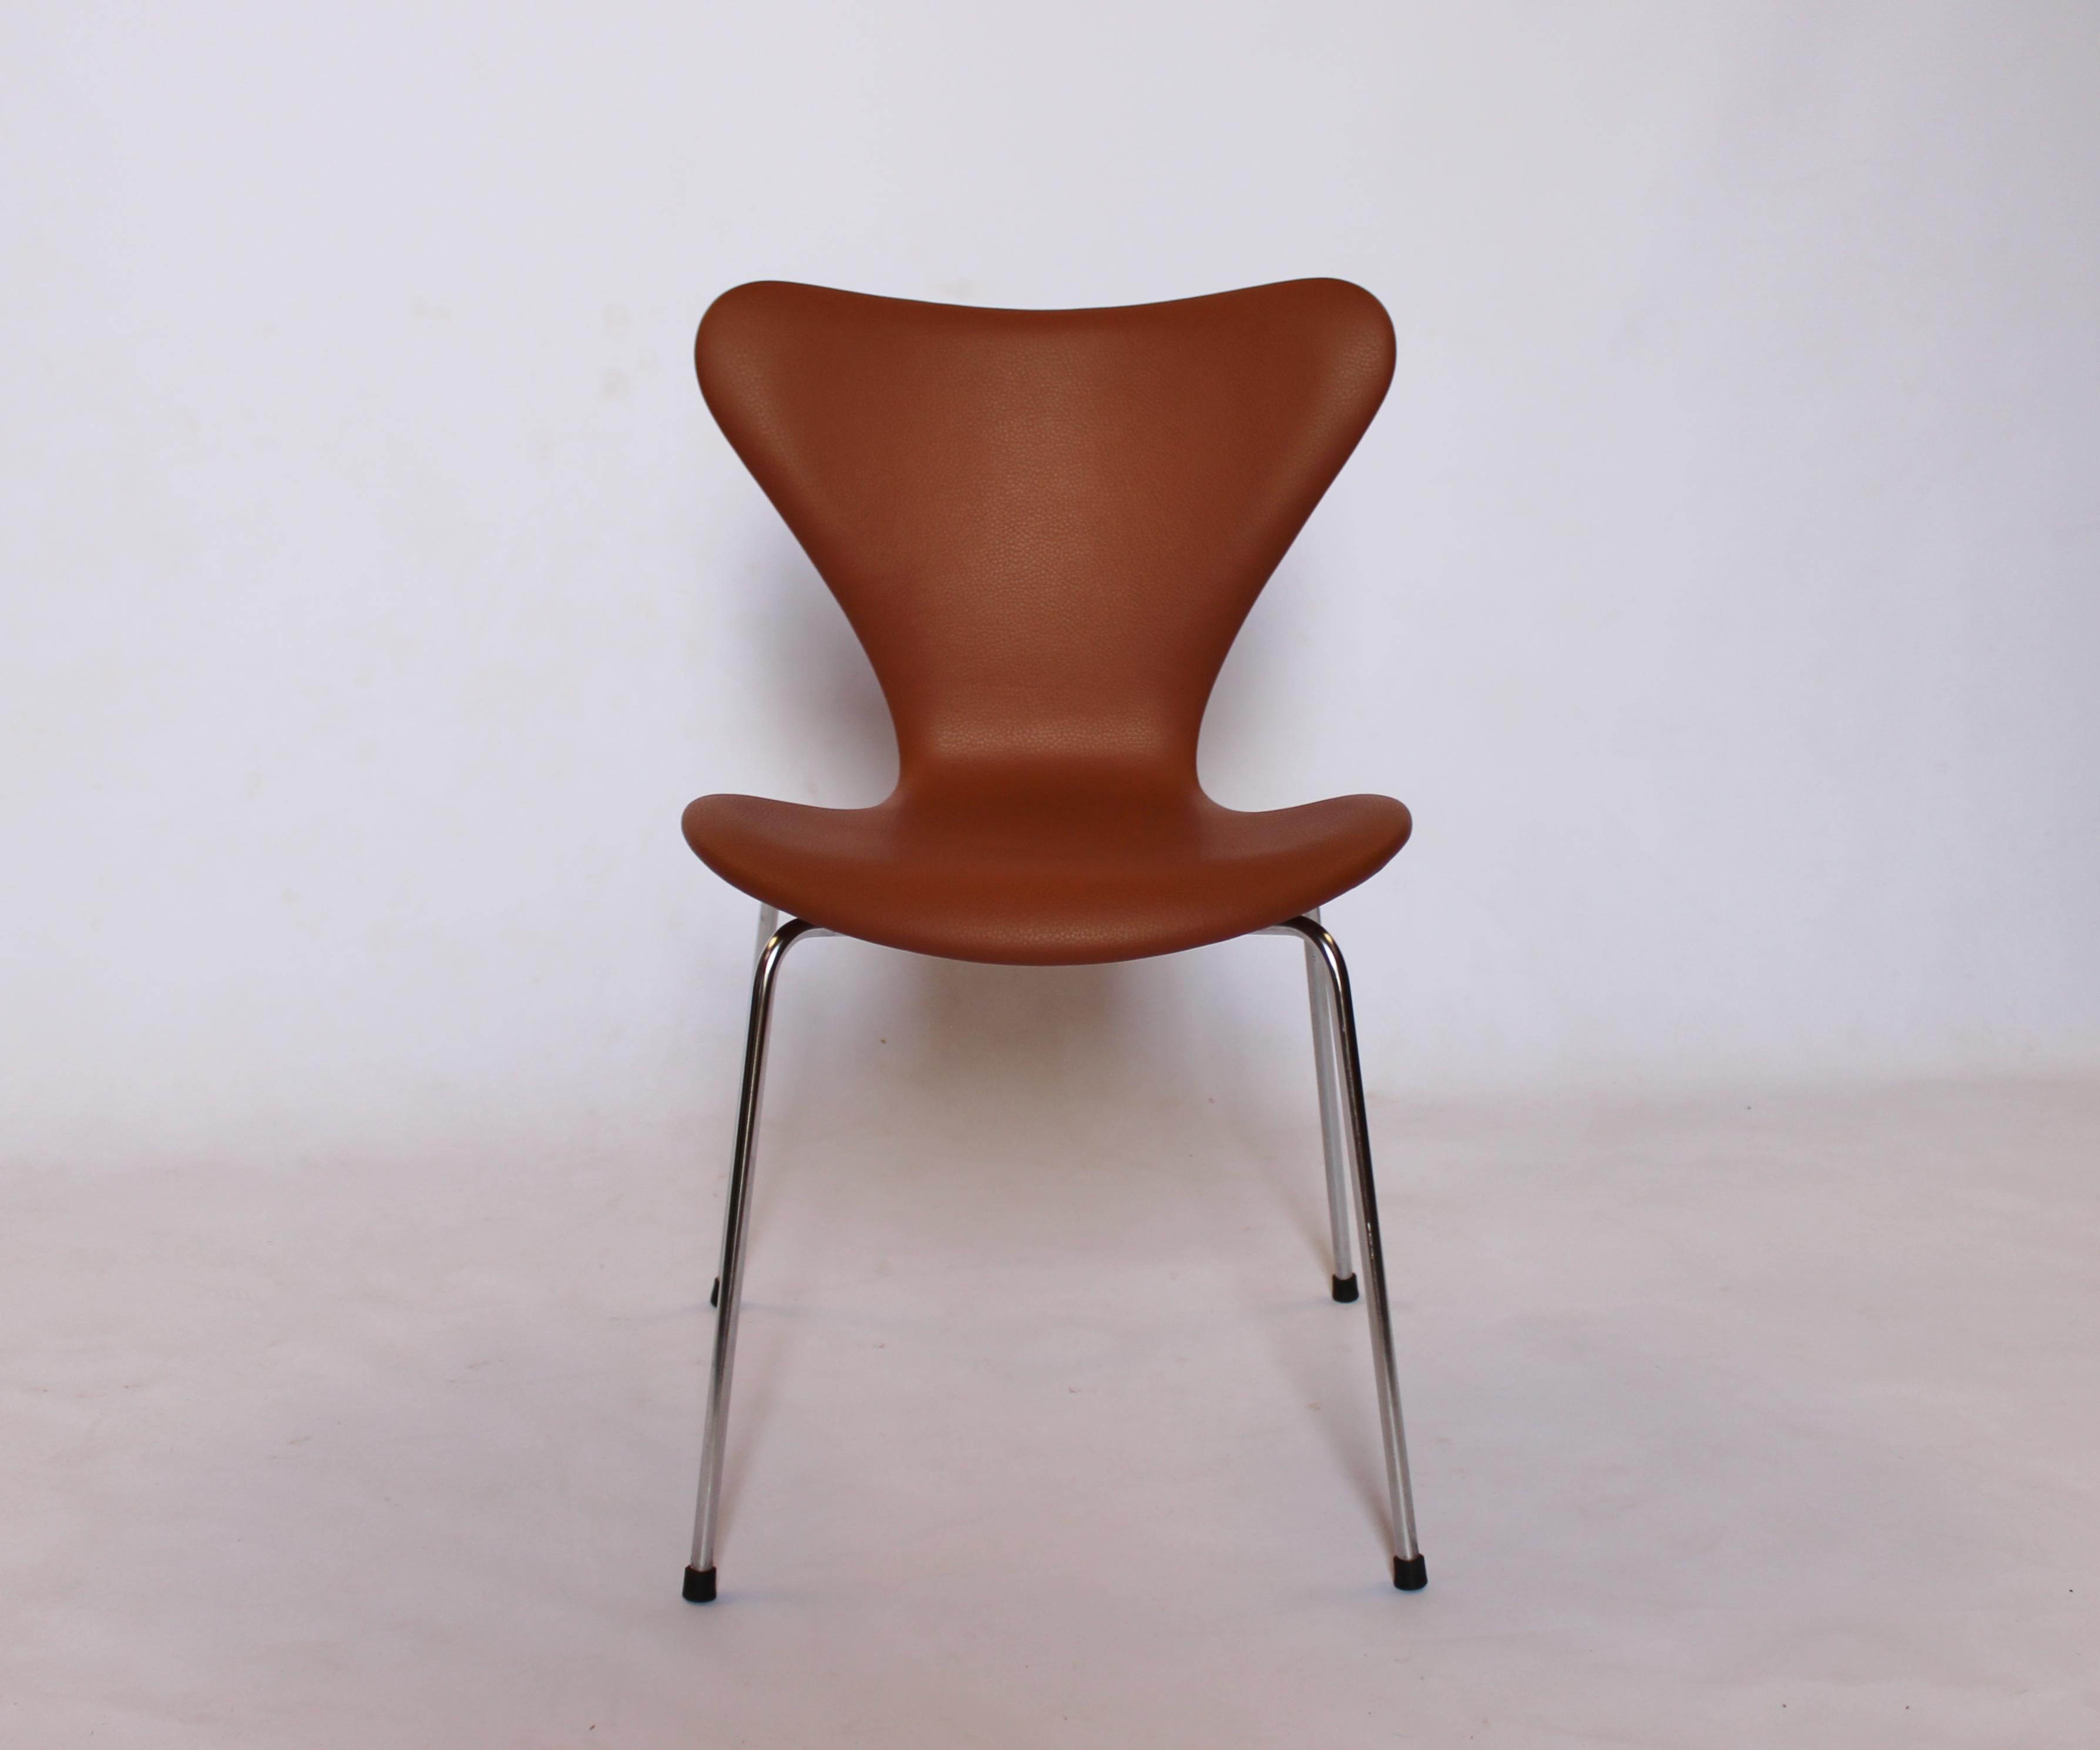 A set of four Seven chairs, model 3107, designed by Arne Jacobsen and manufactured by Fritz Hansen in 1967. The chairs are newly upholstered in cognac classic leather and are in excellent vintage condition.